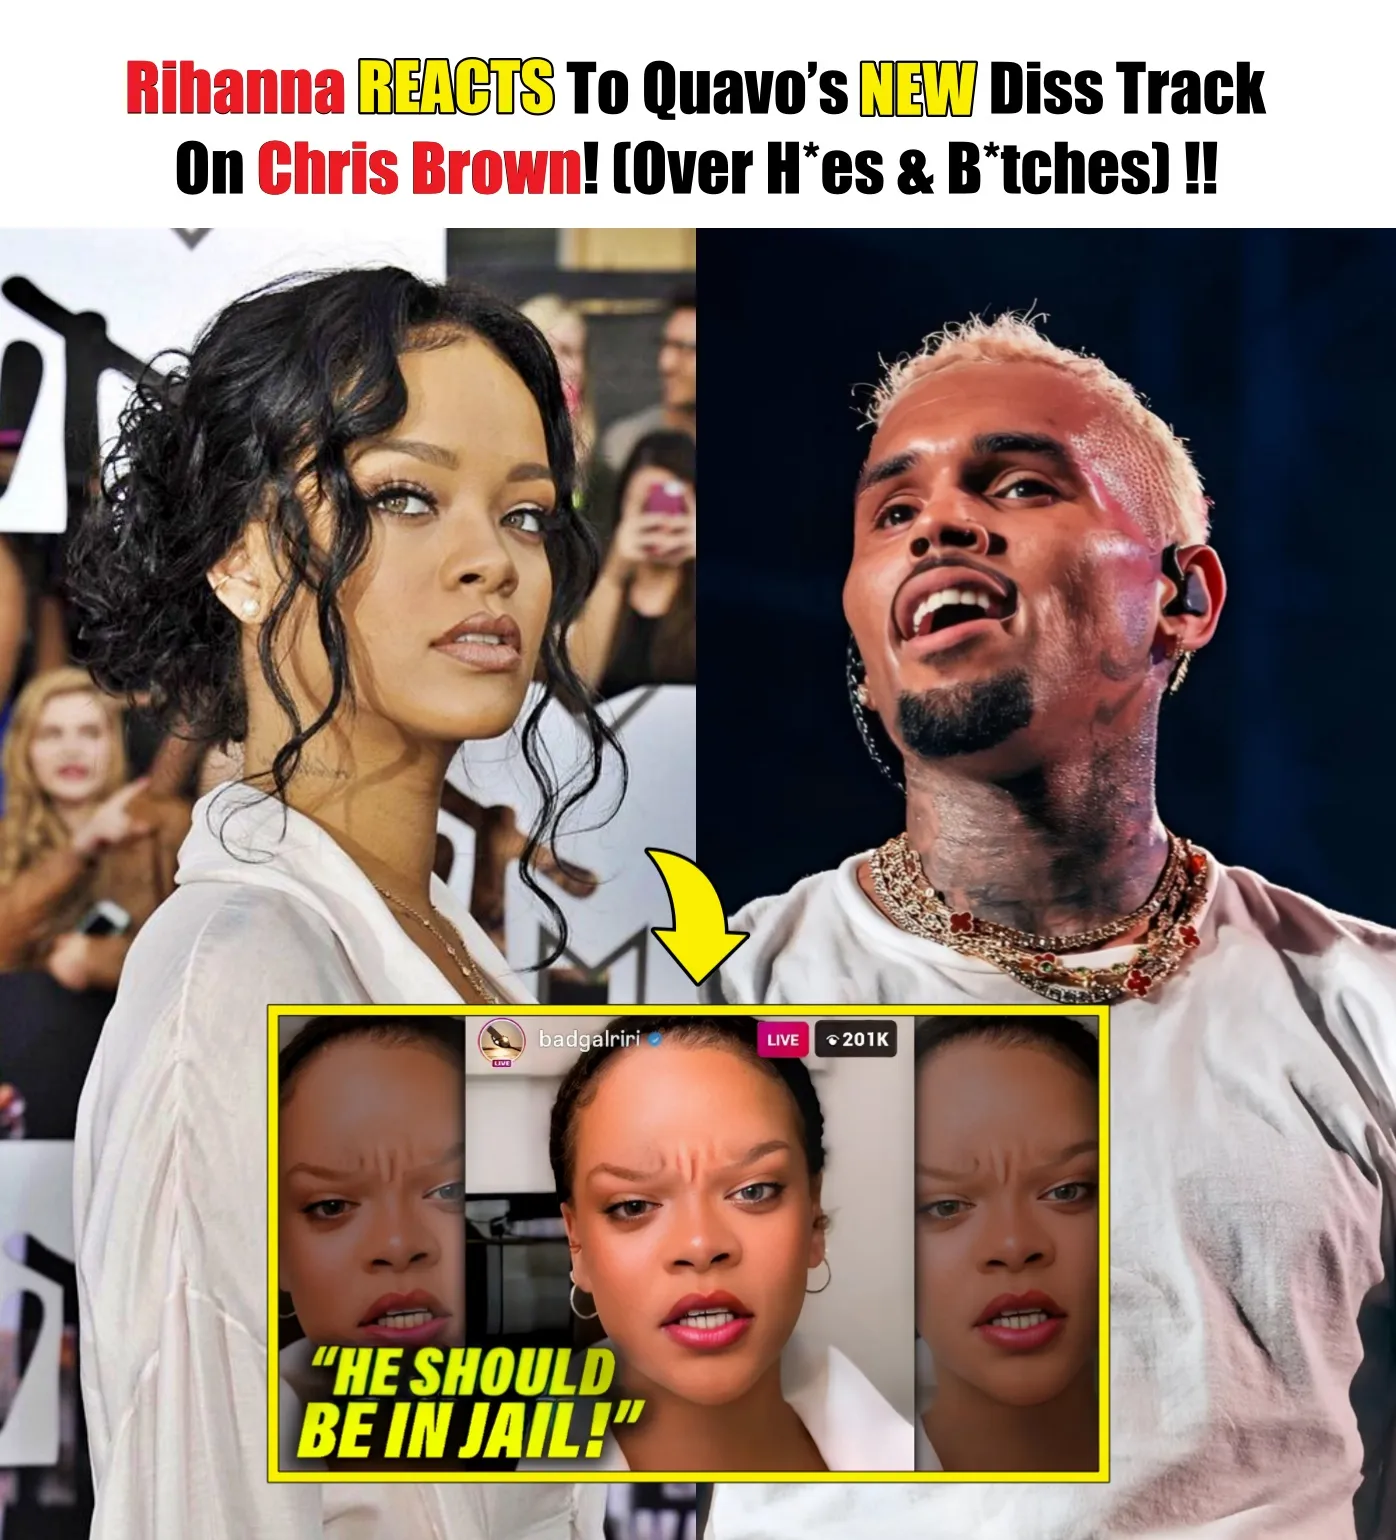 Cover Image for Rihanna REACTS To Quavo’s NEW Diss Track On Chris Brown! (Over H*es & B*tches)